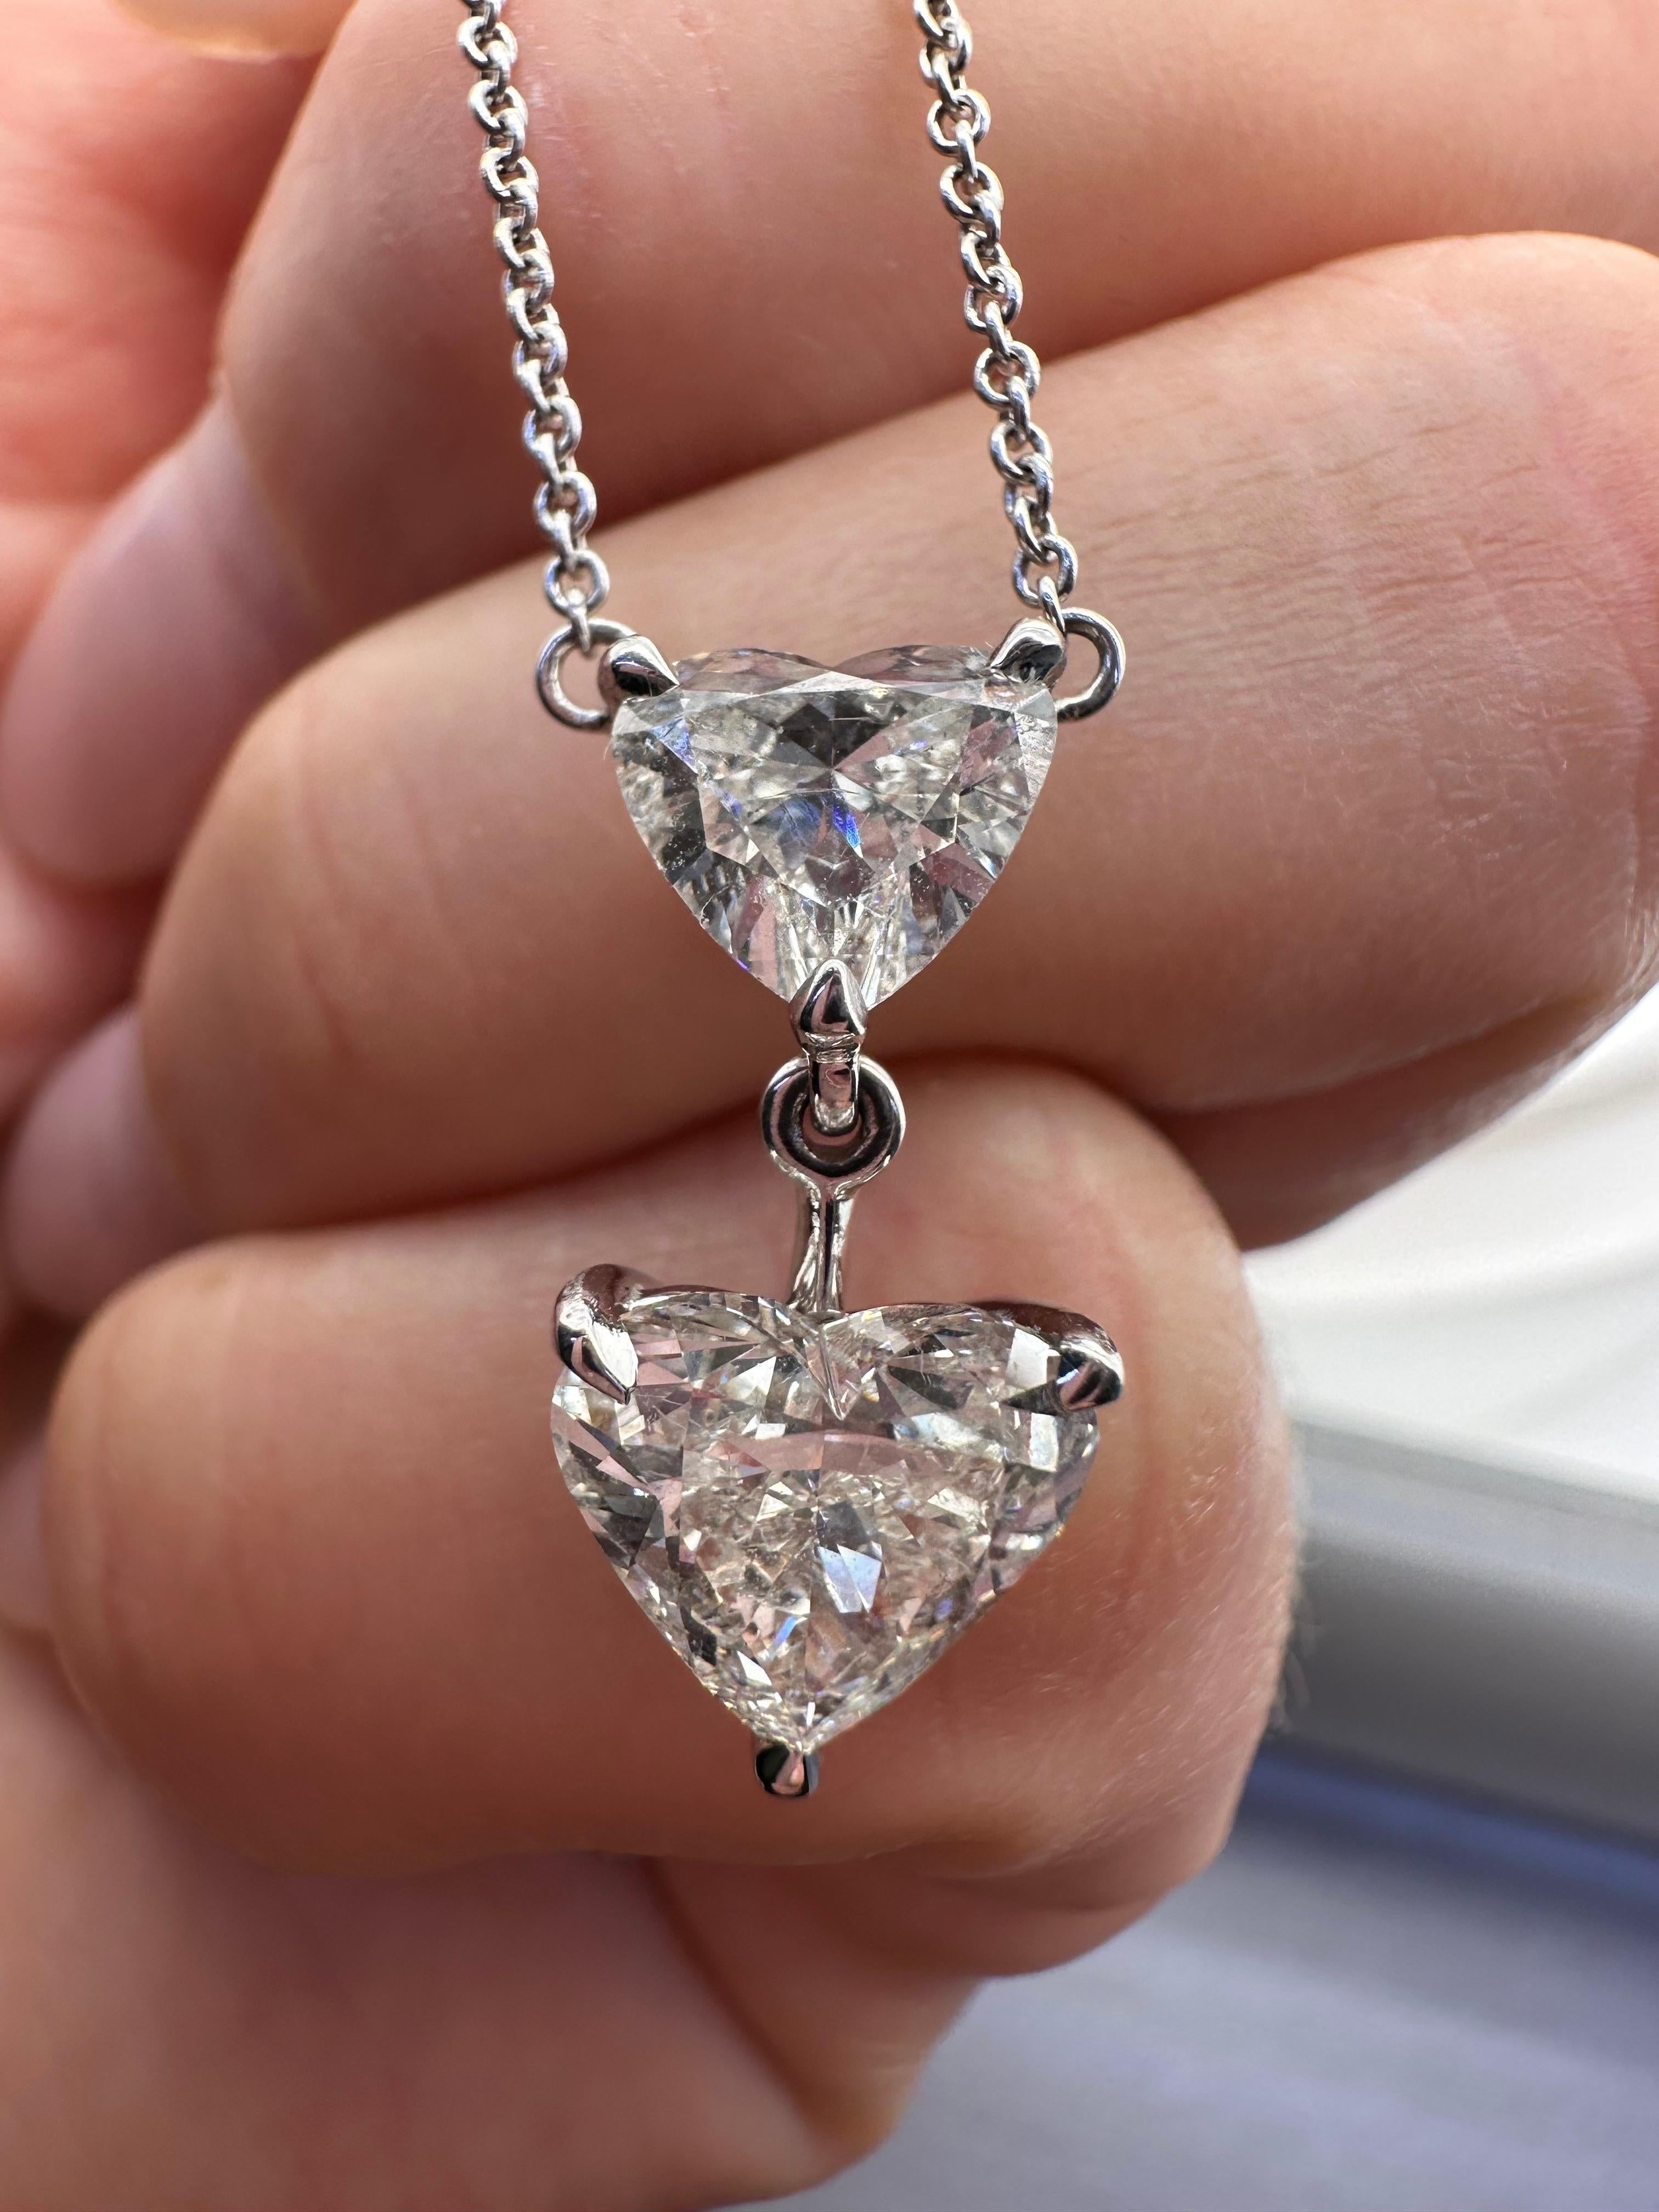 GIA certified heart brilliant in 18KT white gold, stunning necklace with small heart diamonds and 2 large daimonds hanging in the front. Both diamonds are certified GIA diamonds that look stunning on this necklace, this is a rare piece of jewelry